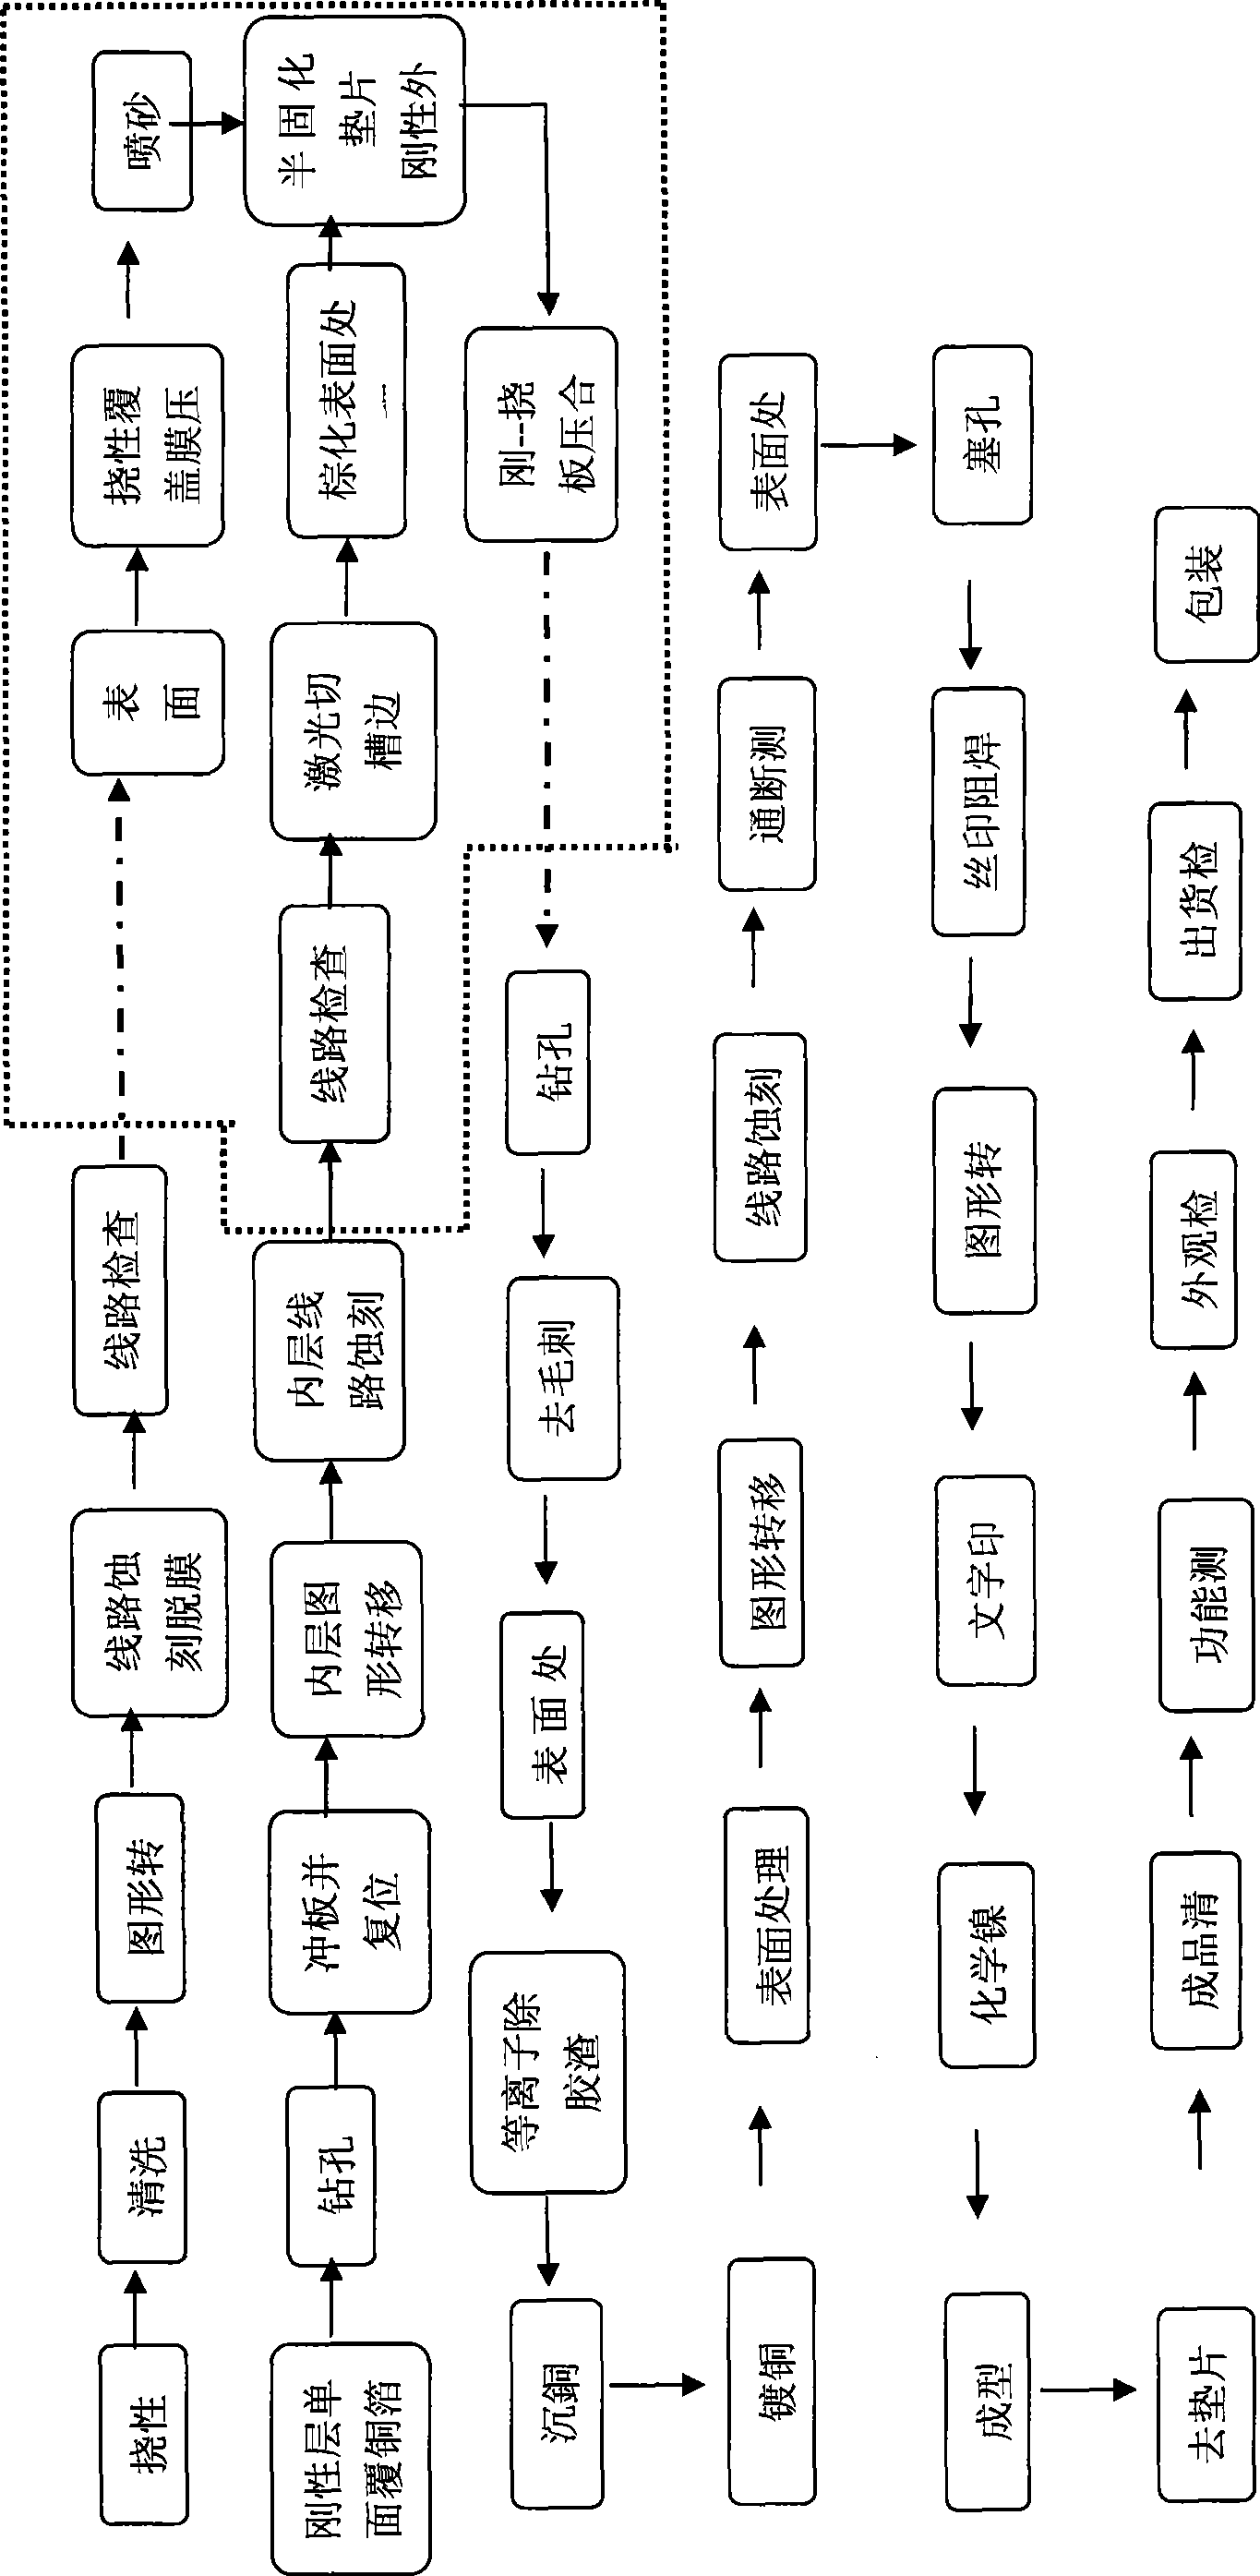 Manufacturing method for multilayered rigidity and flexibility combined printed circuit board